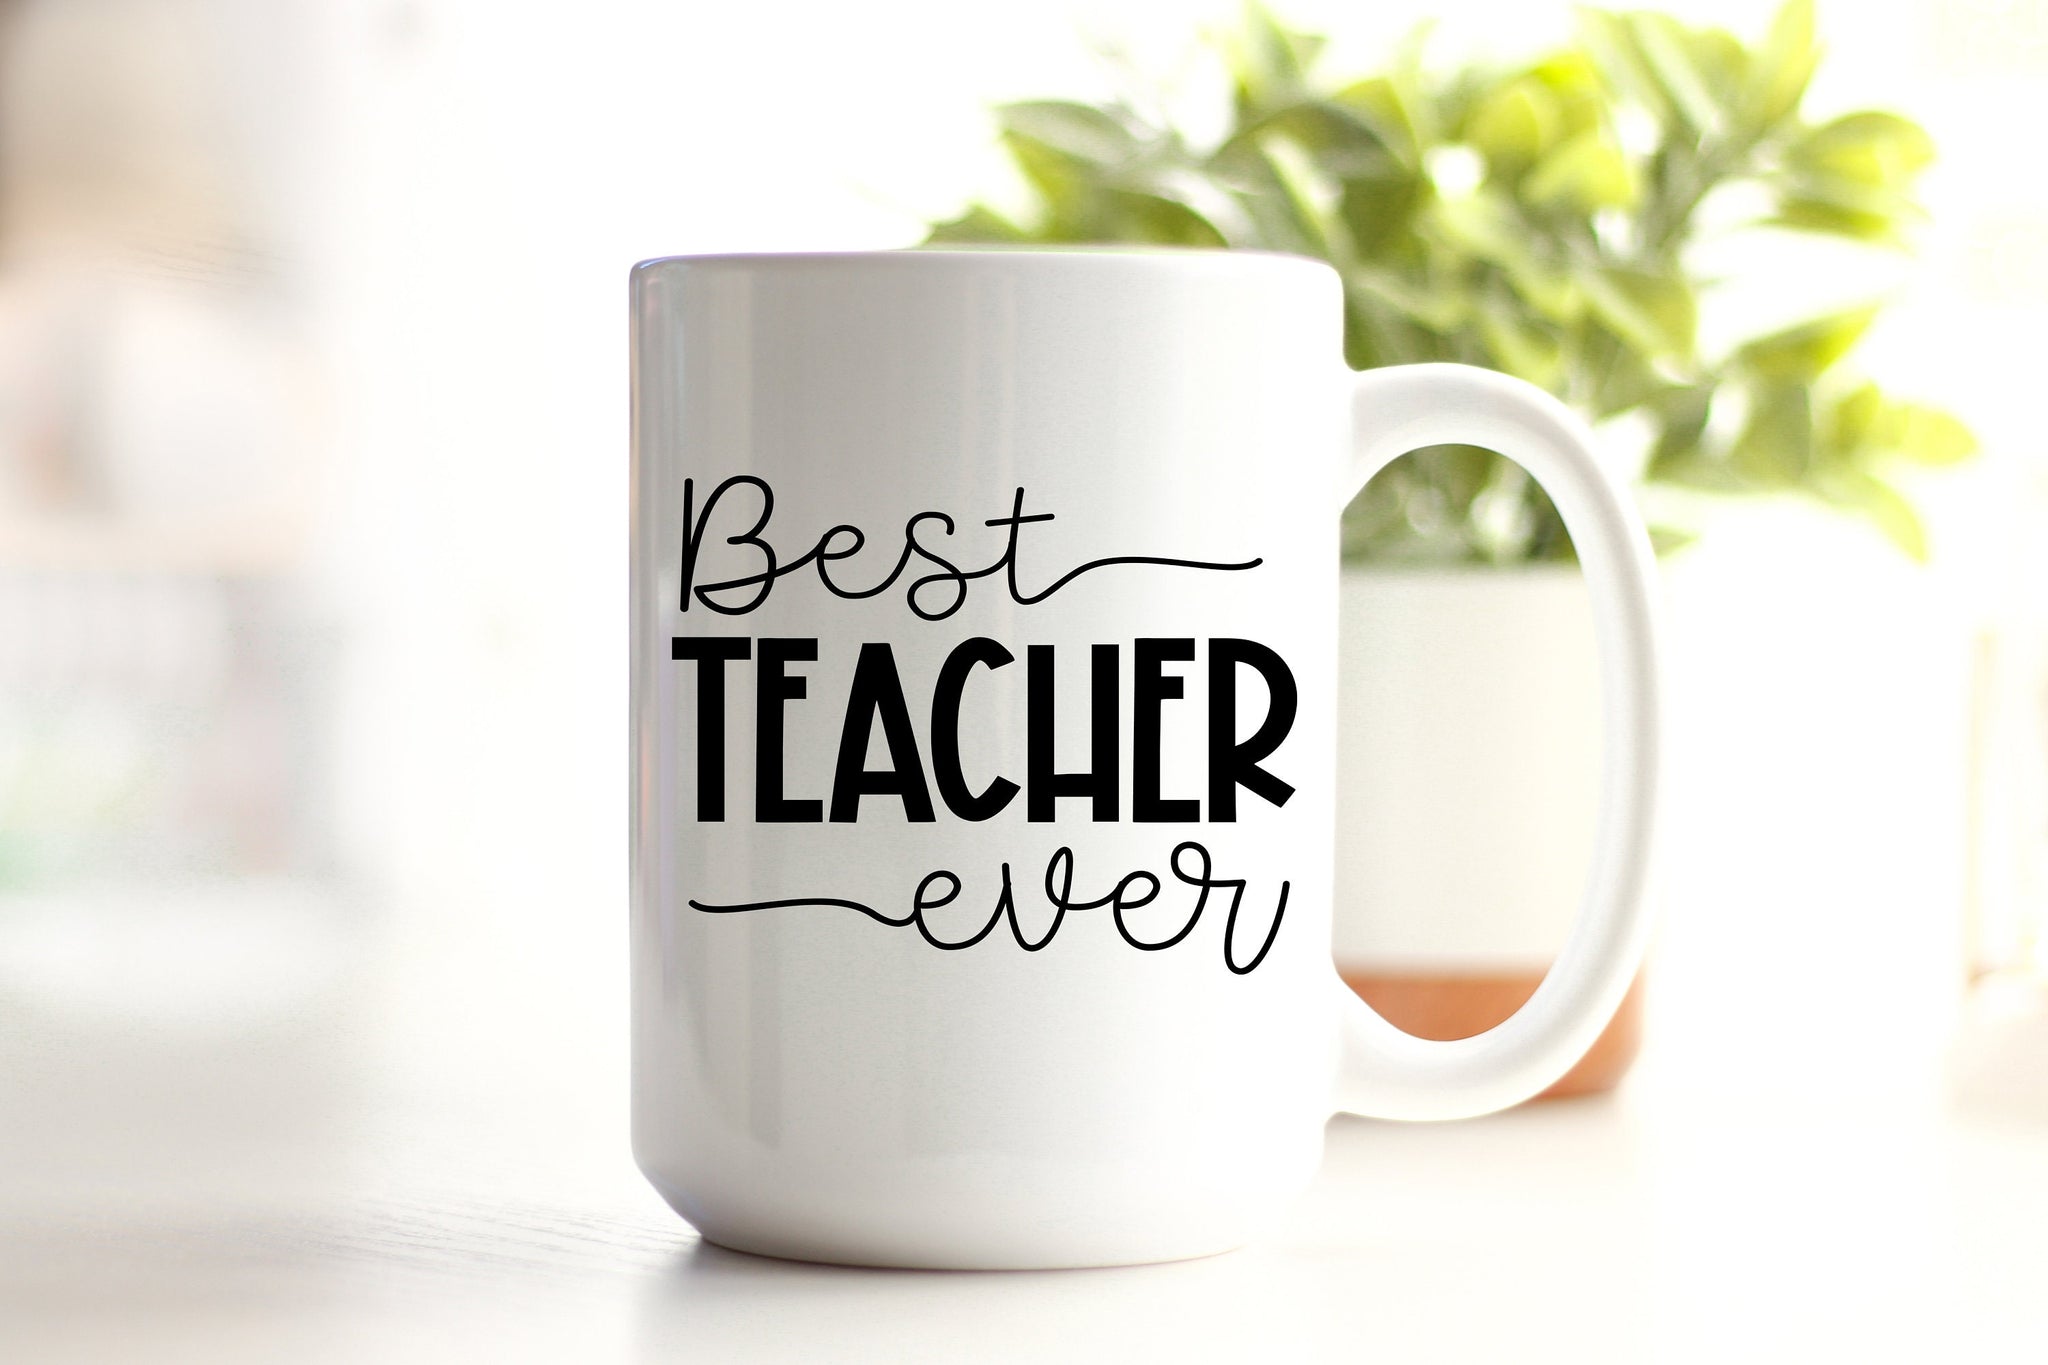 Best Teacher Ever Coffee Mug Gift For Teacher Appriciation Week, End Of The Year Teacher Back To School Christmas Gift For Her